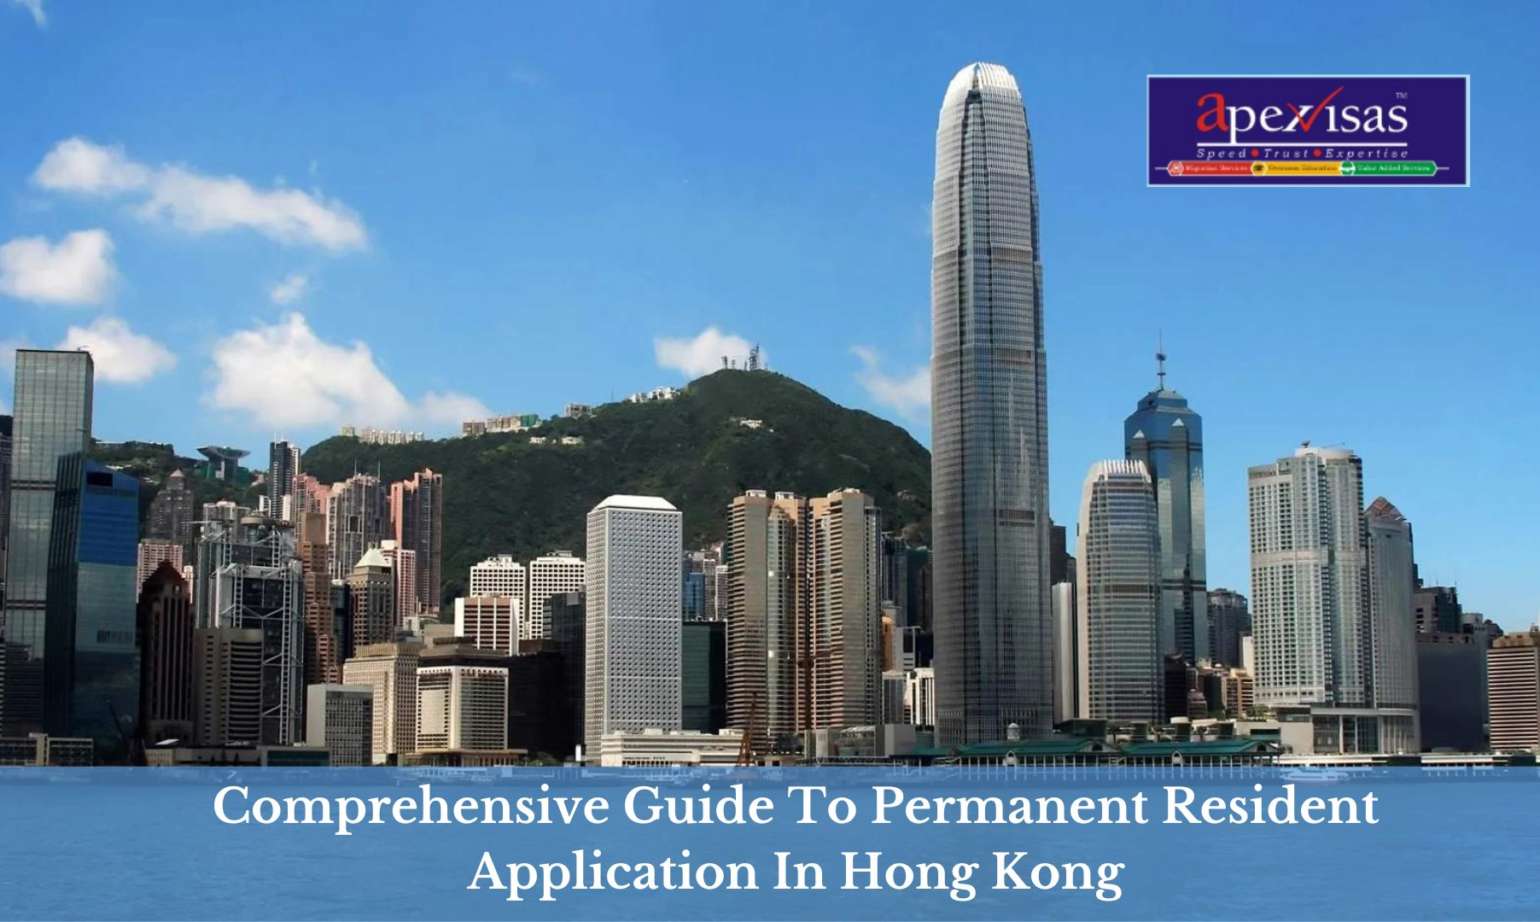 Comprehensive Guide To Permanent Resident Application In Hong Kong